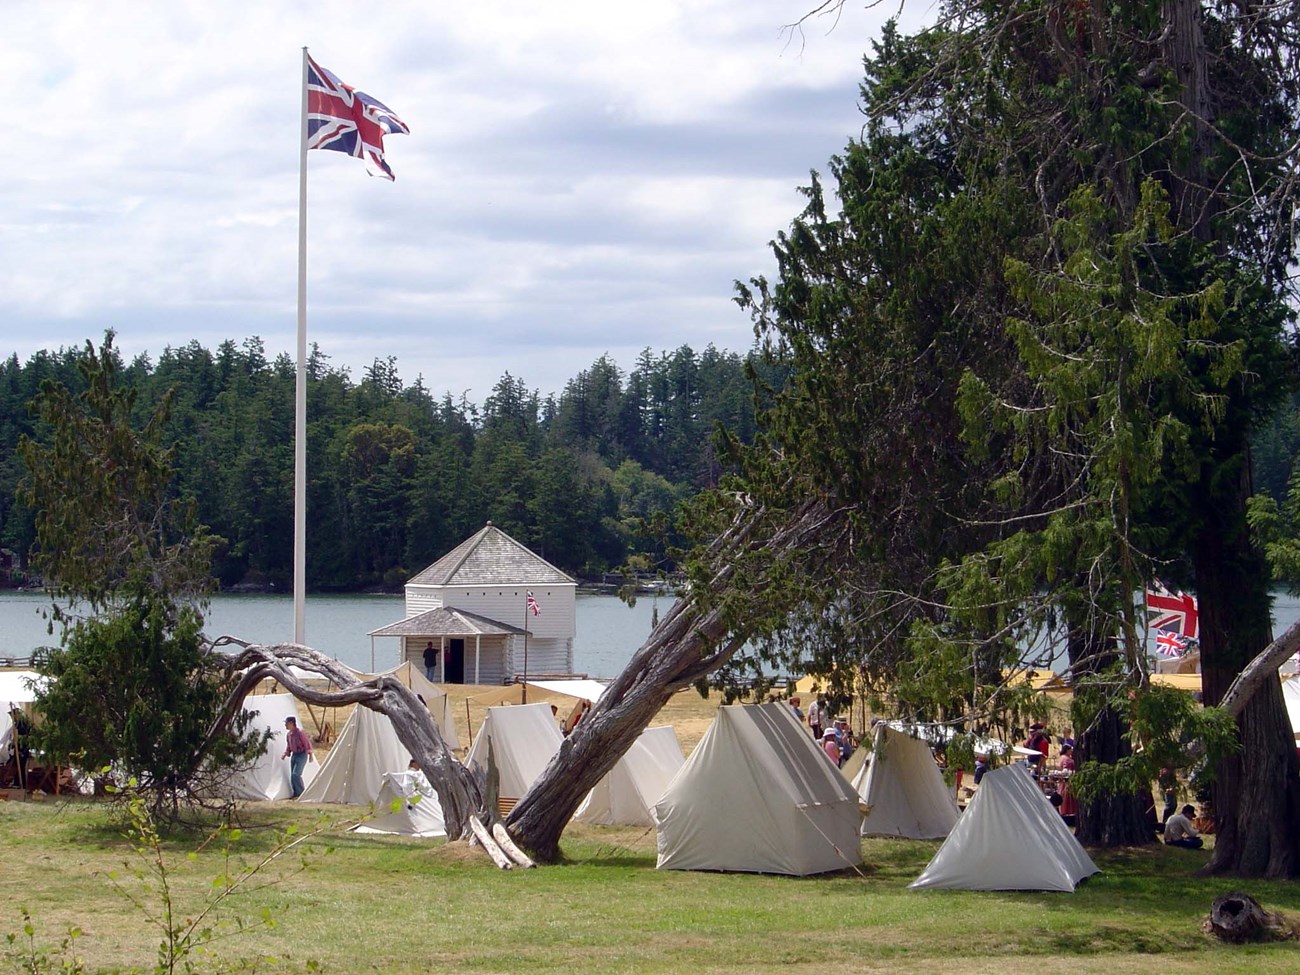 a full group of tents in front of a british flag